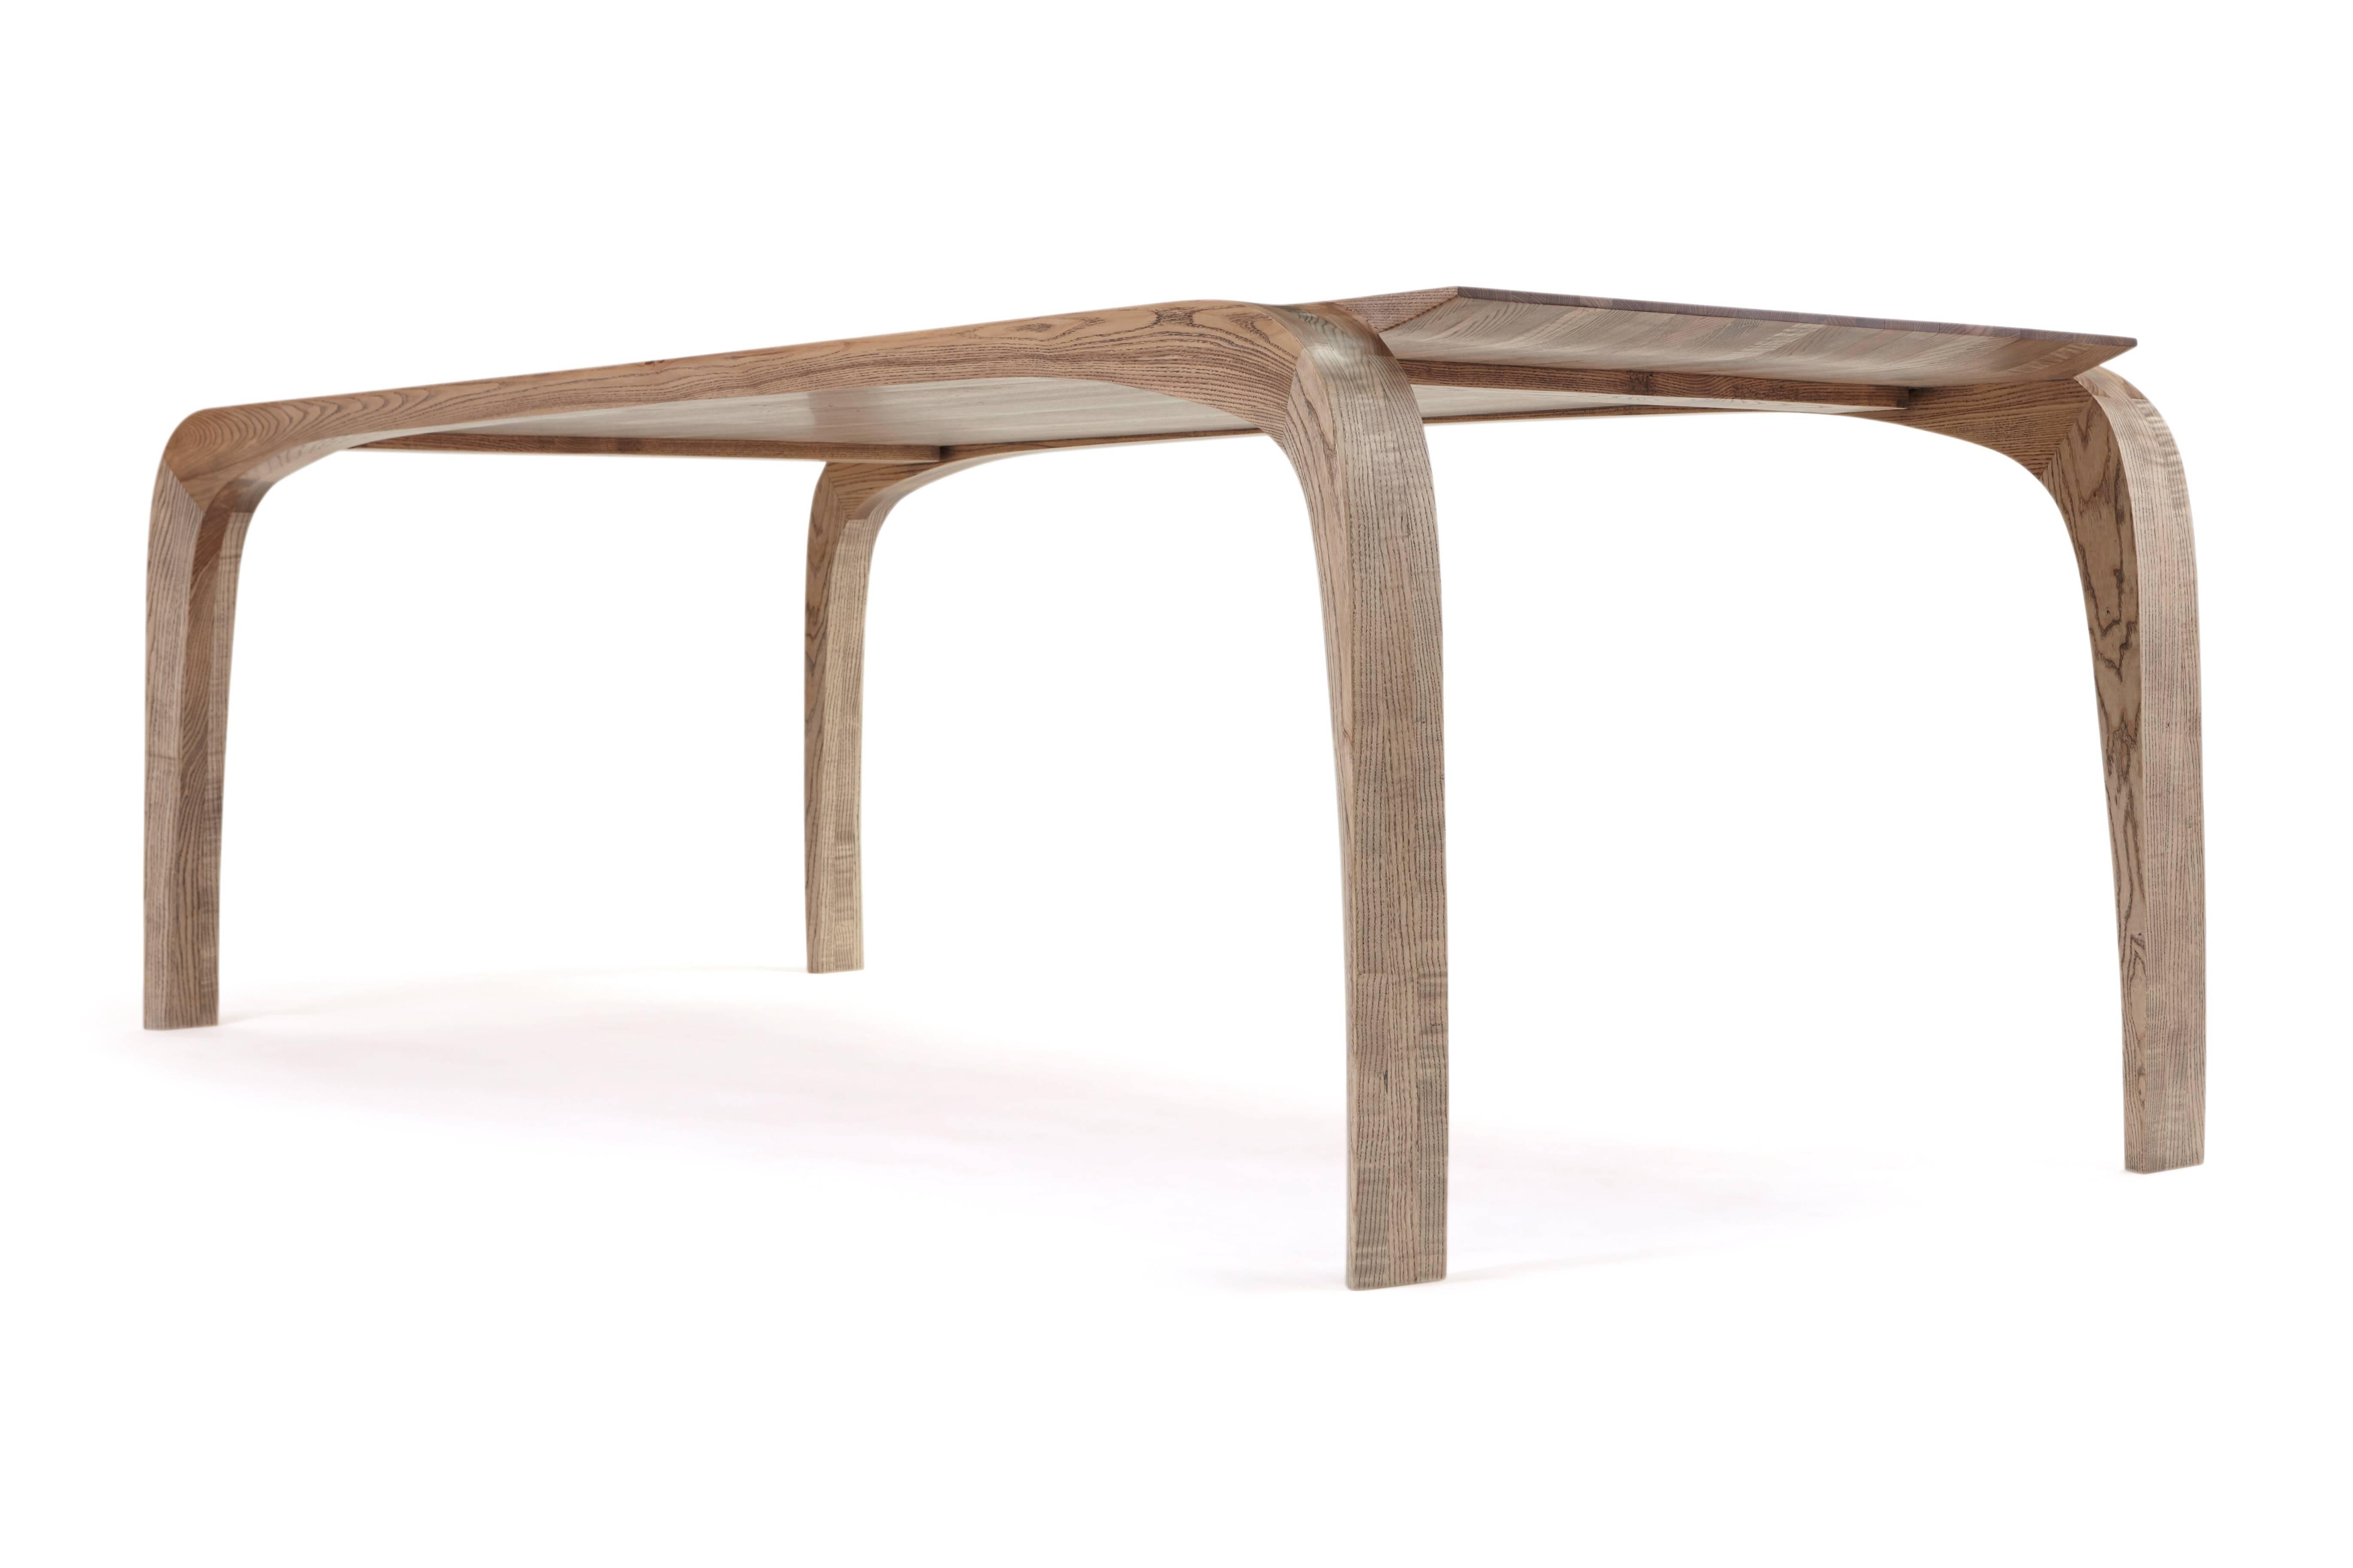 English Dining Table, hand carved legs. European ash. by Jonathan Field. bespoke sizes.